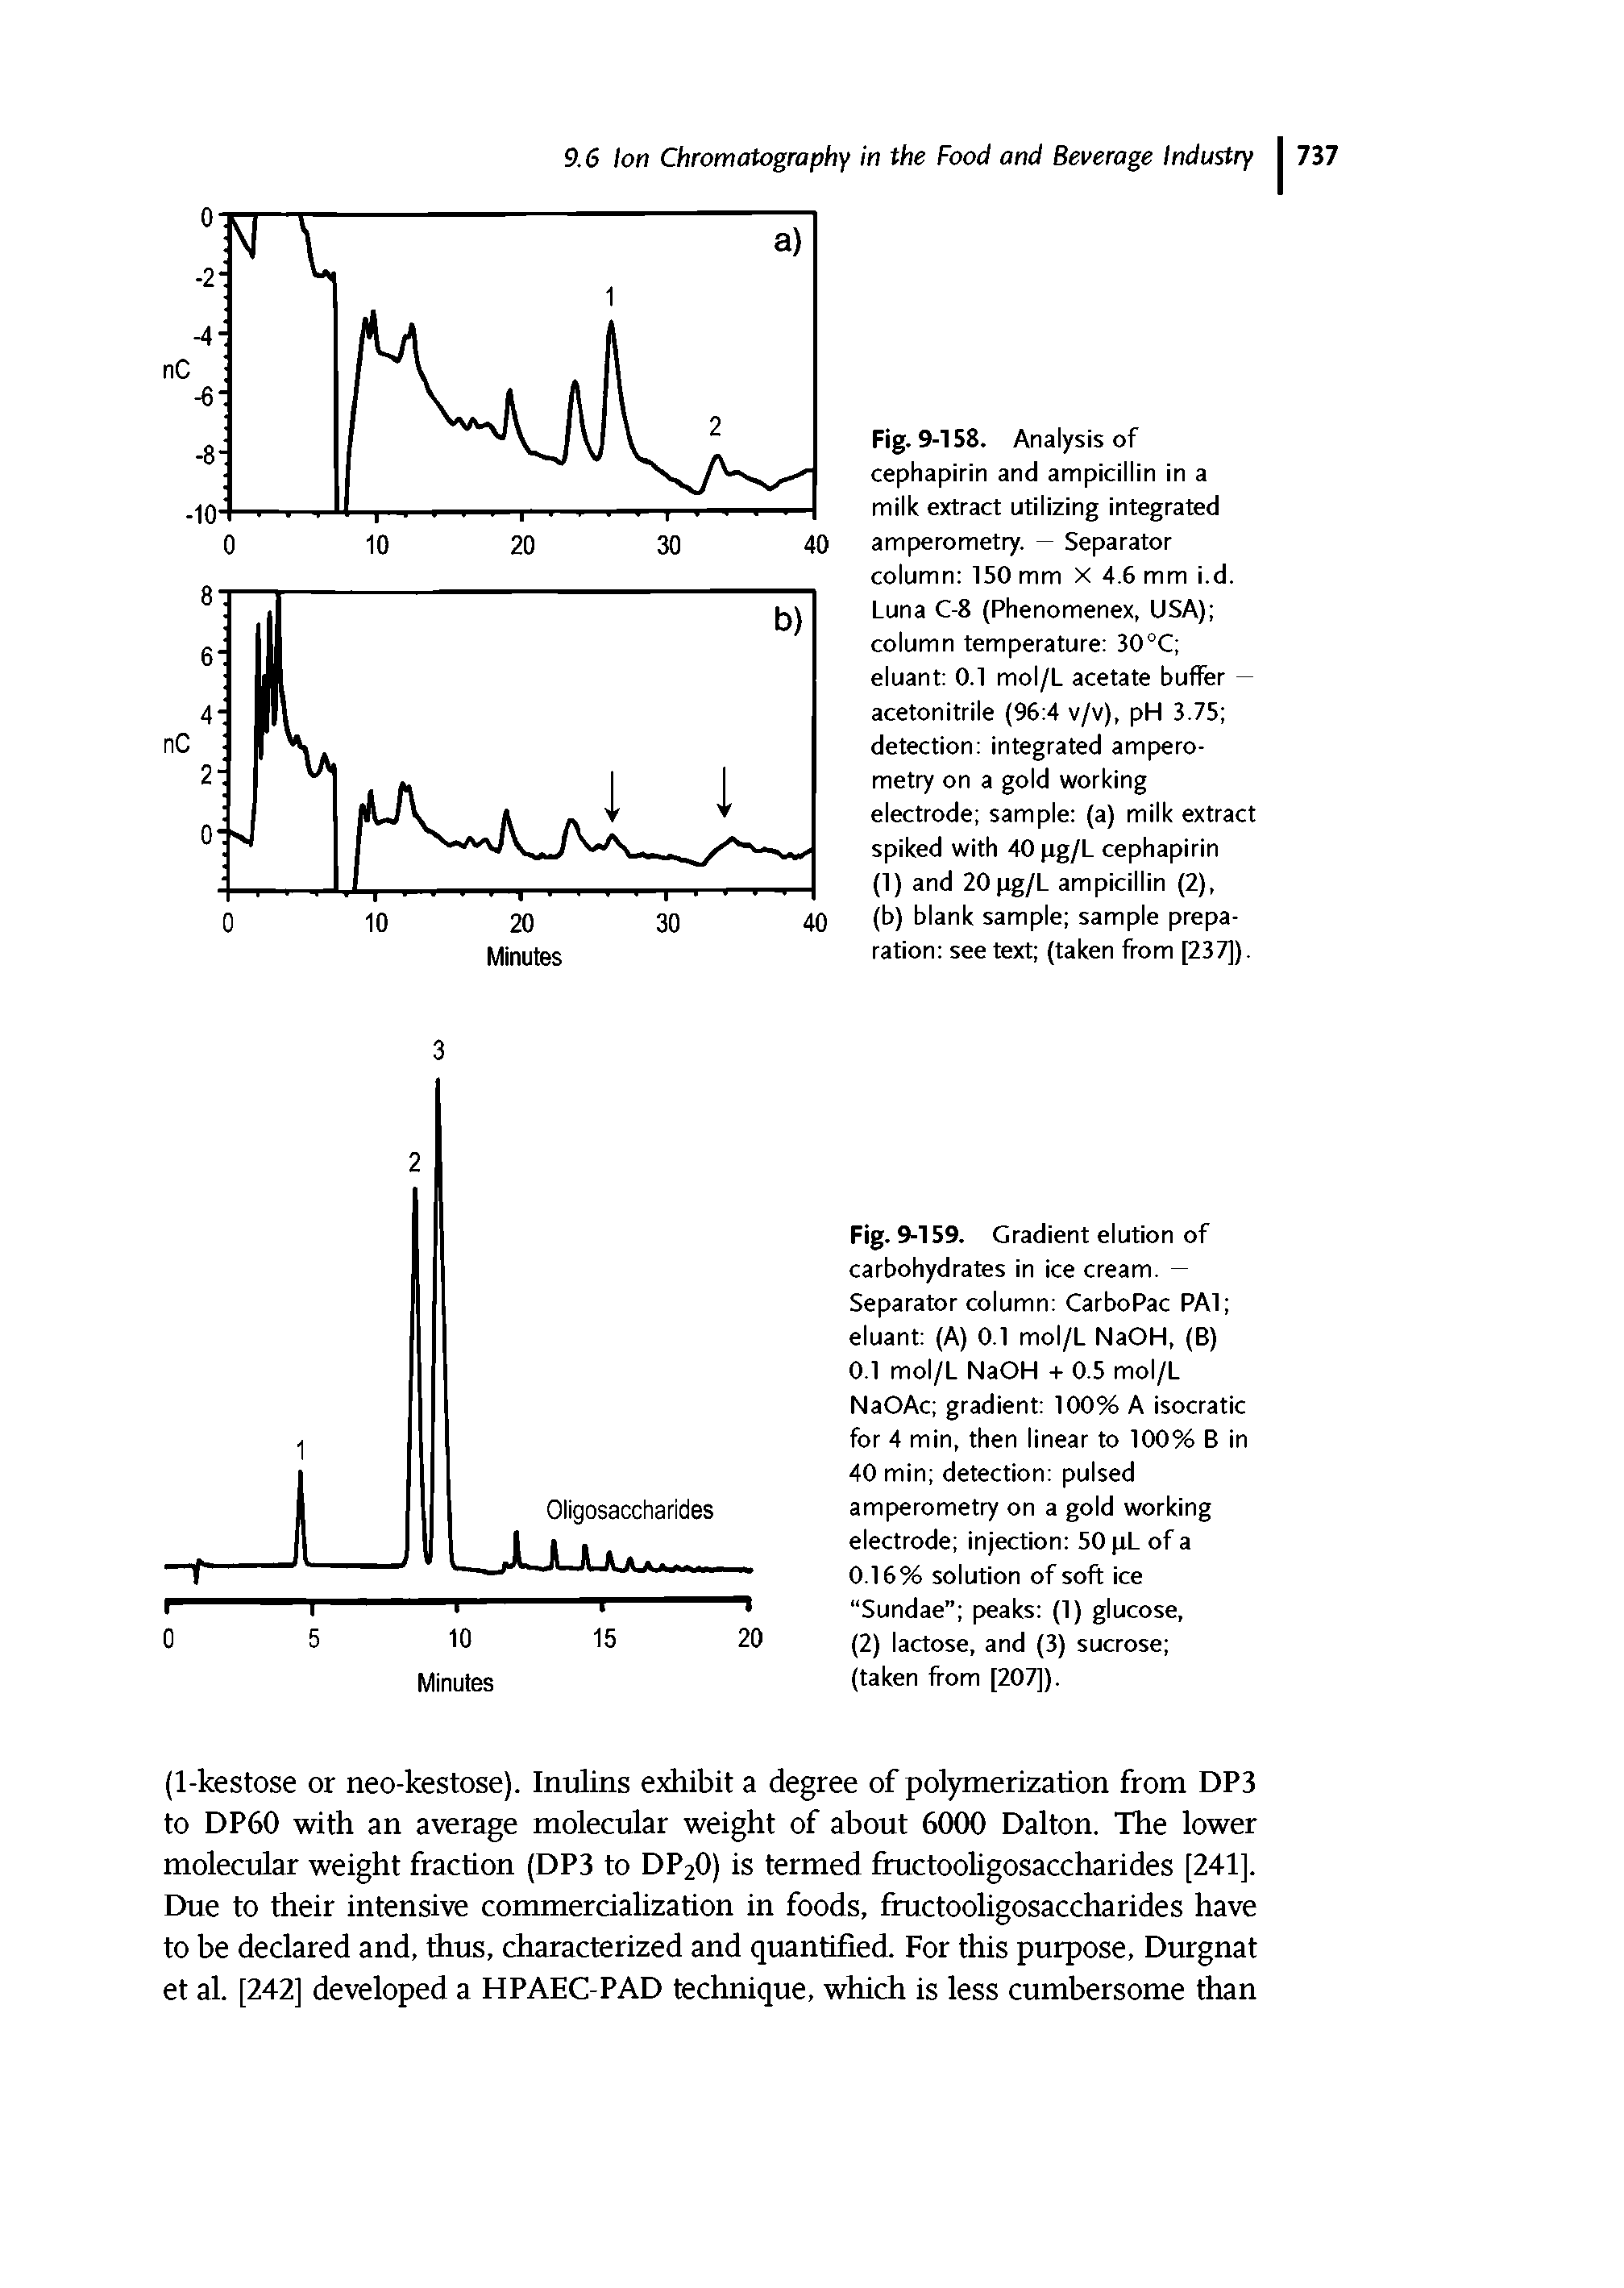 Fig. 9-158. Analysis of cephapirin and ampicillin in a milk extract utilizing integrated amperometry. - Separator column 150 mm x 4.6 mm i.d. Luna C-8 (Phenomenex, USA) column temperature 30°C eluant 0.1 mol/L acetate buffer — acetonitrile (96 4 v/v), pH 3.75 detection integrated amperometry on a gold working electrode sample (a) milk extract spiked with 40 pg/L cephapirin (1) and 20 pg/L ampicillin (2),...